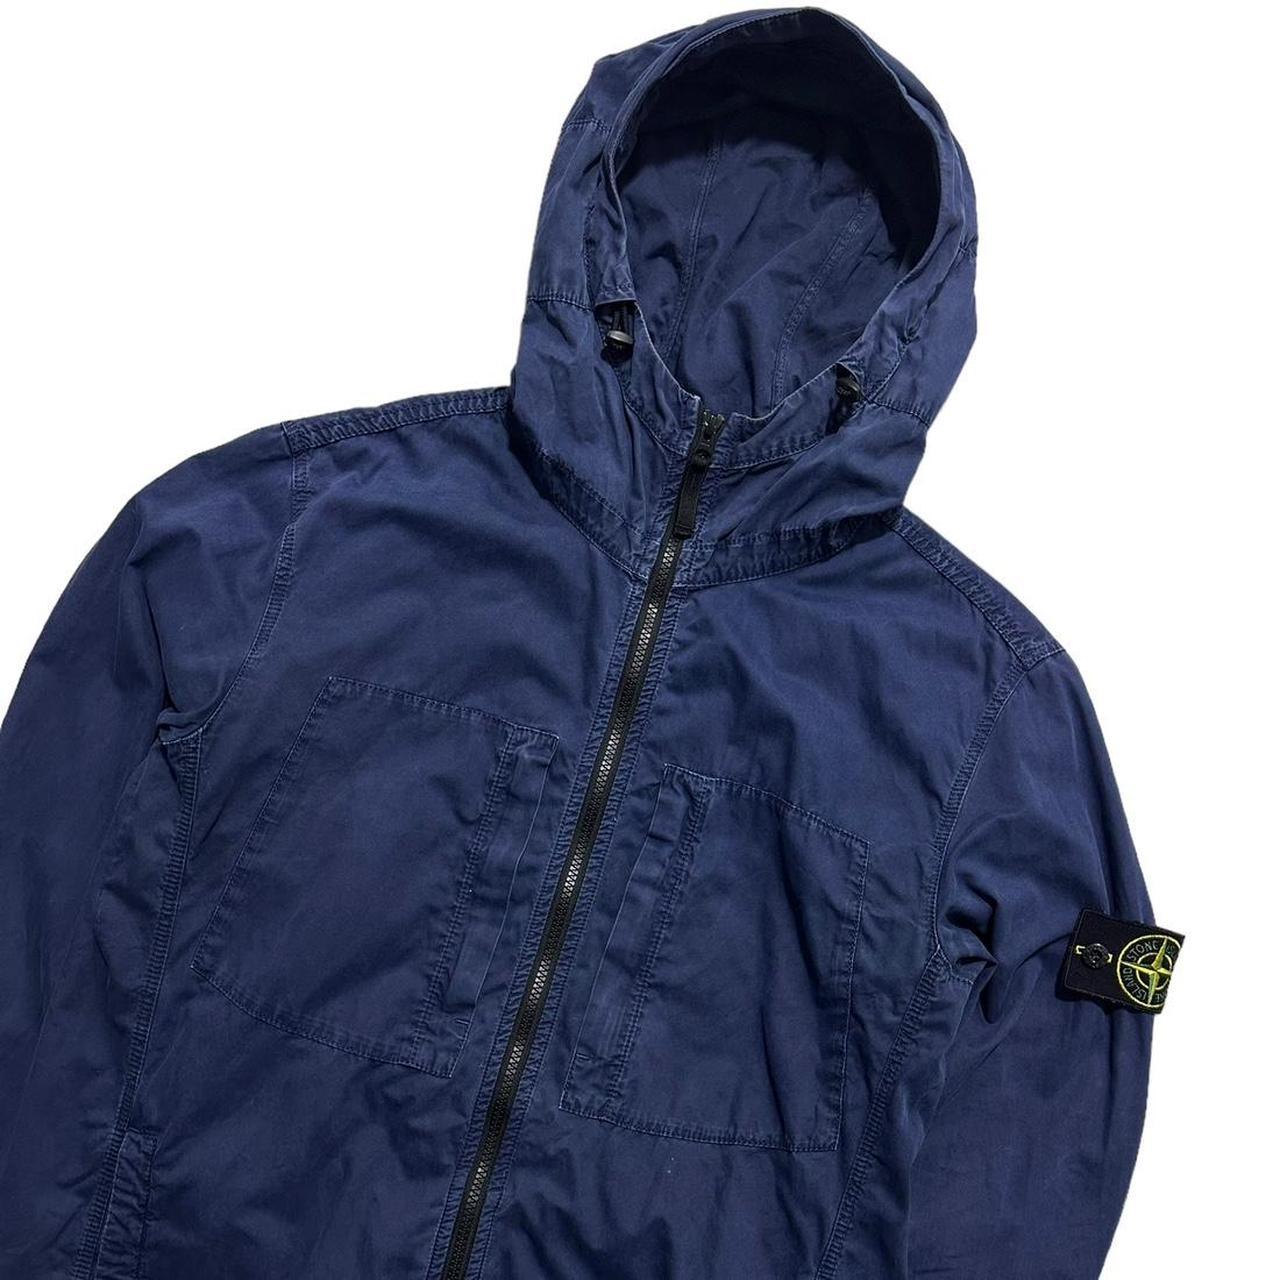 Stone Island Blue Hooded Canvas Jacket - Known Source